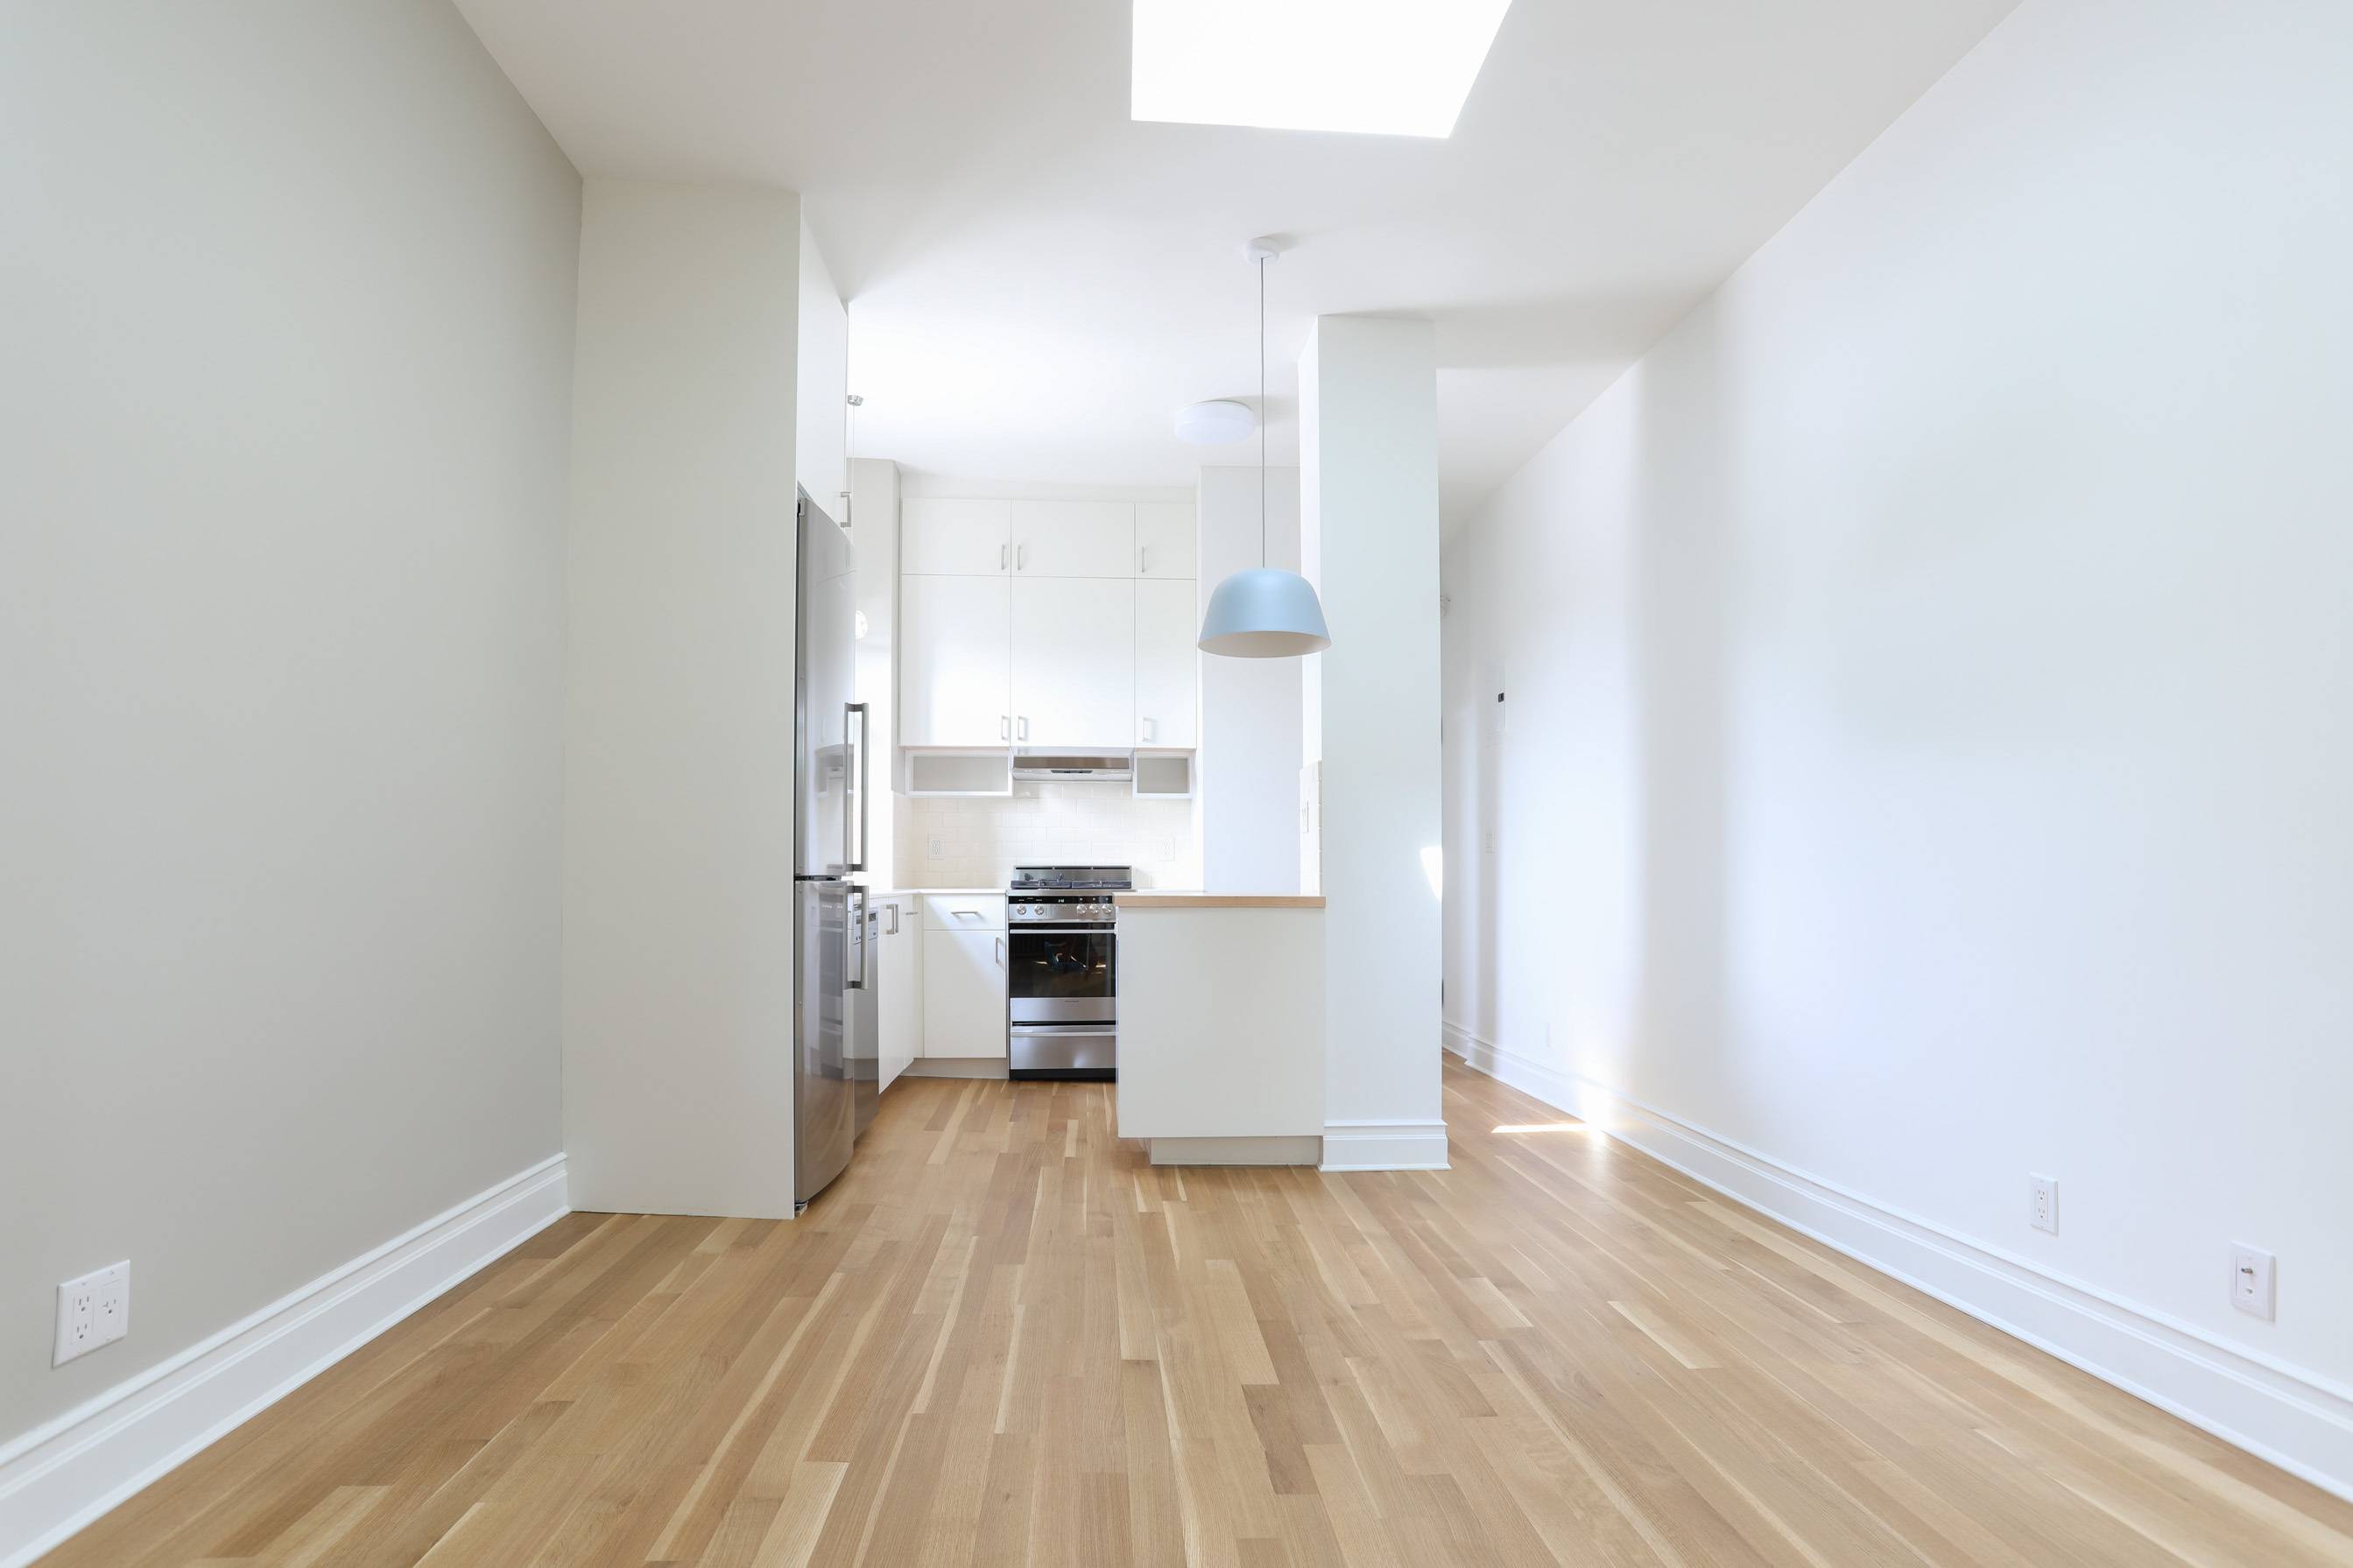 On this beautiful, tree lined, and sun drenched street sits a recently renovated alcove studio Jr 1 apartment.